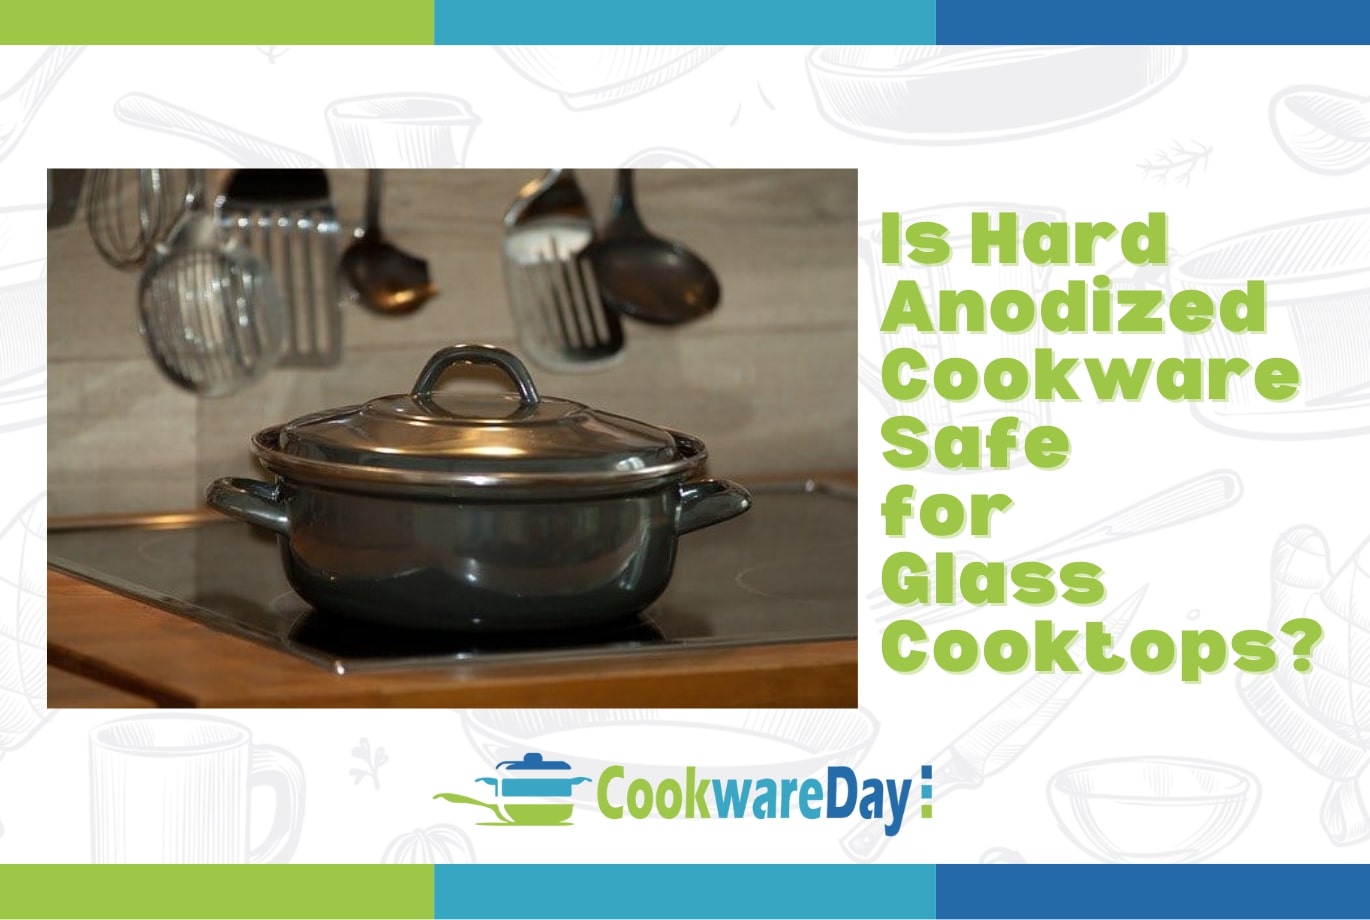 Is Hard Anodized Cookware Safe for Glass Cooktops?